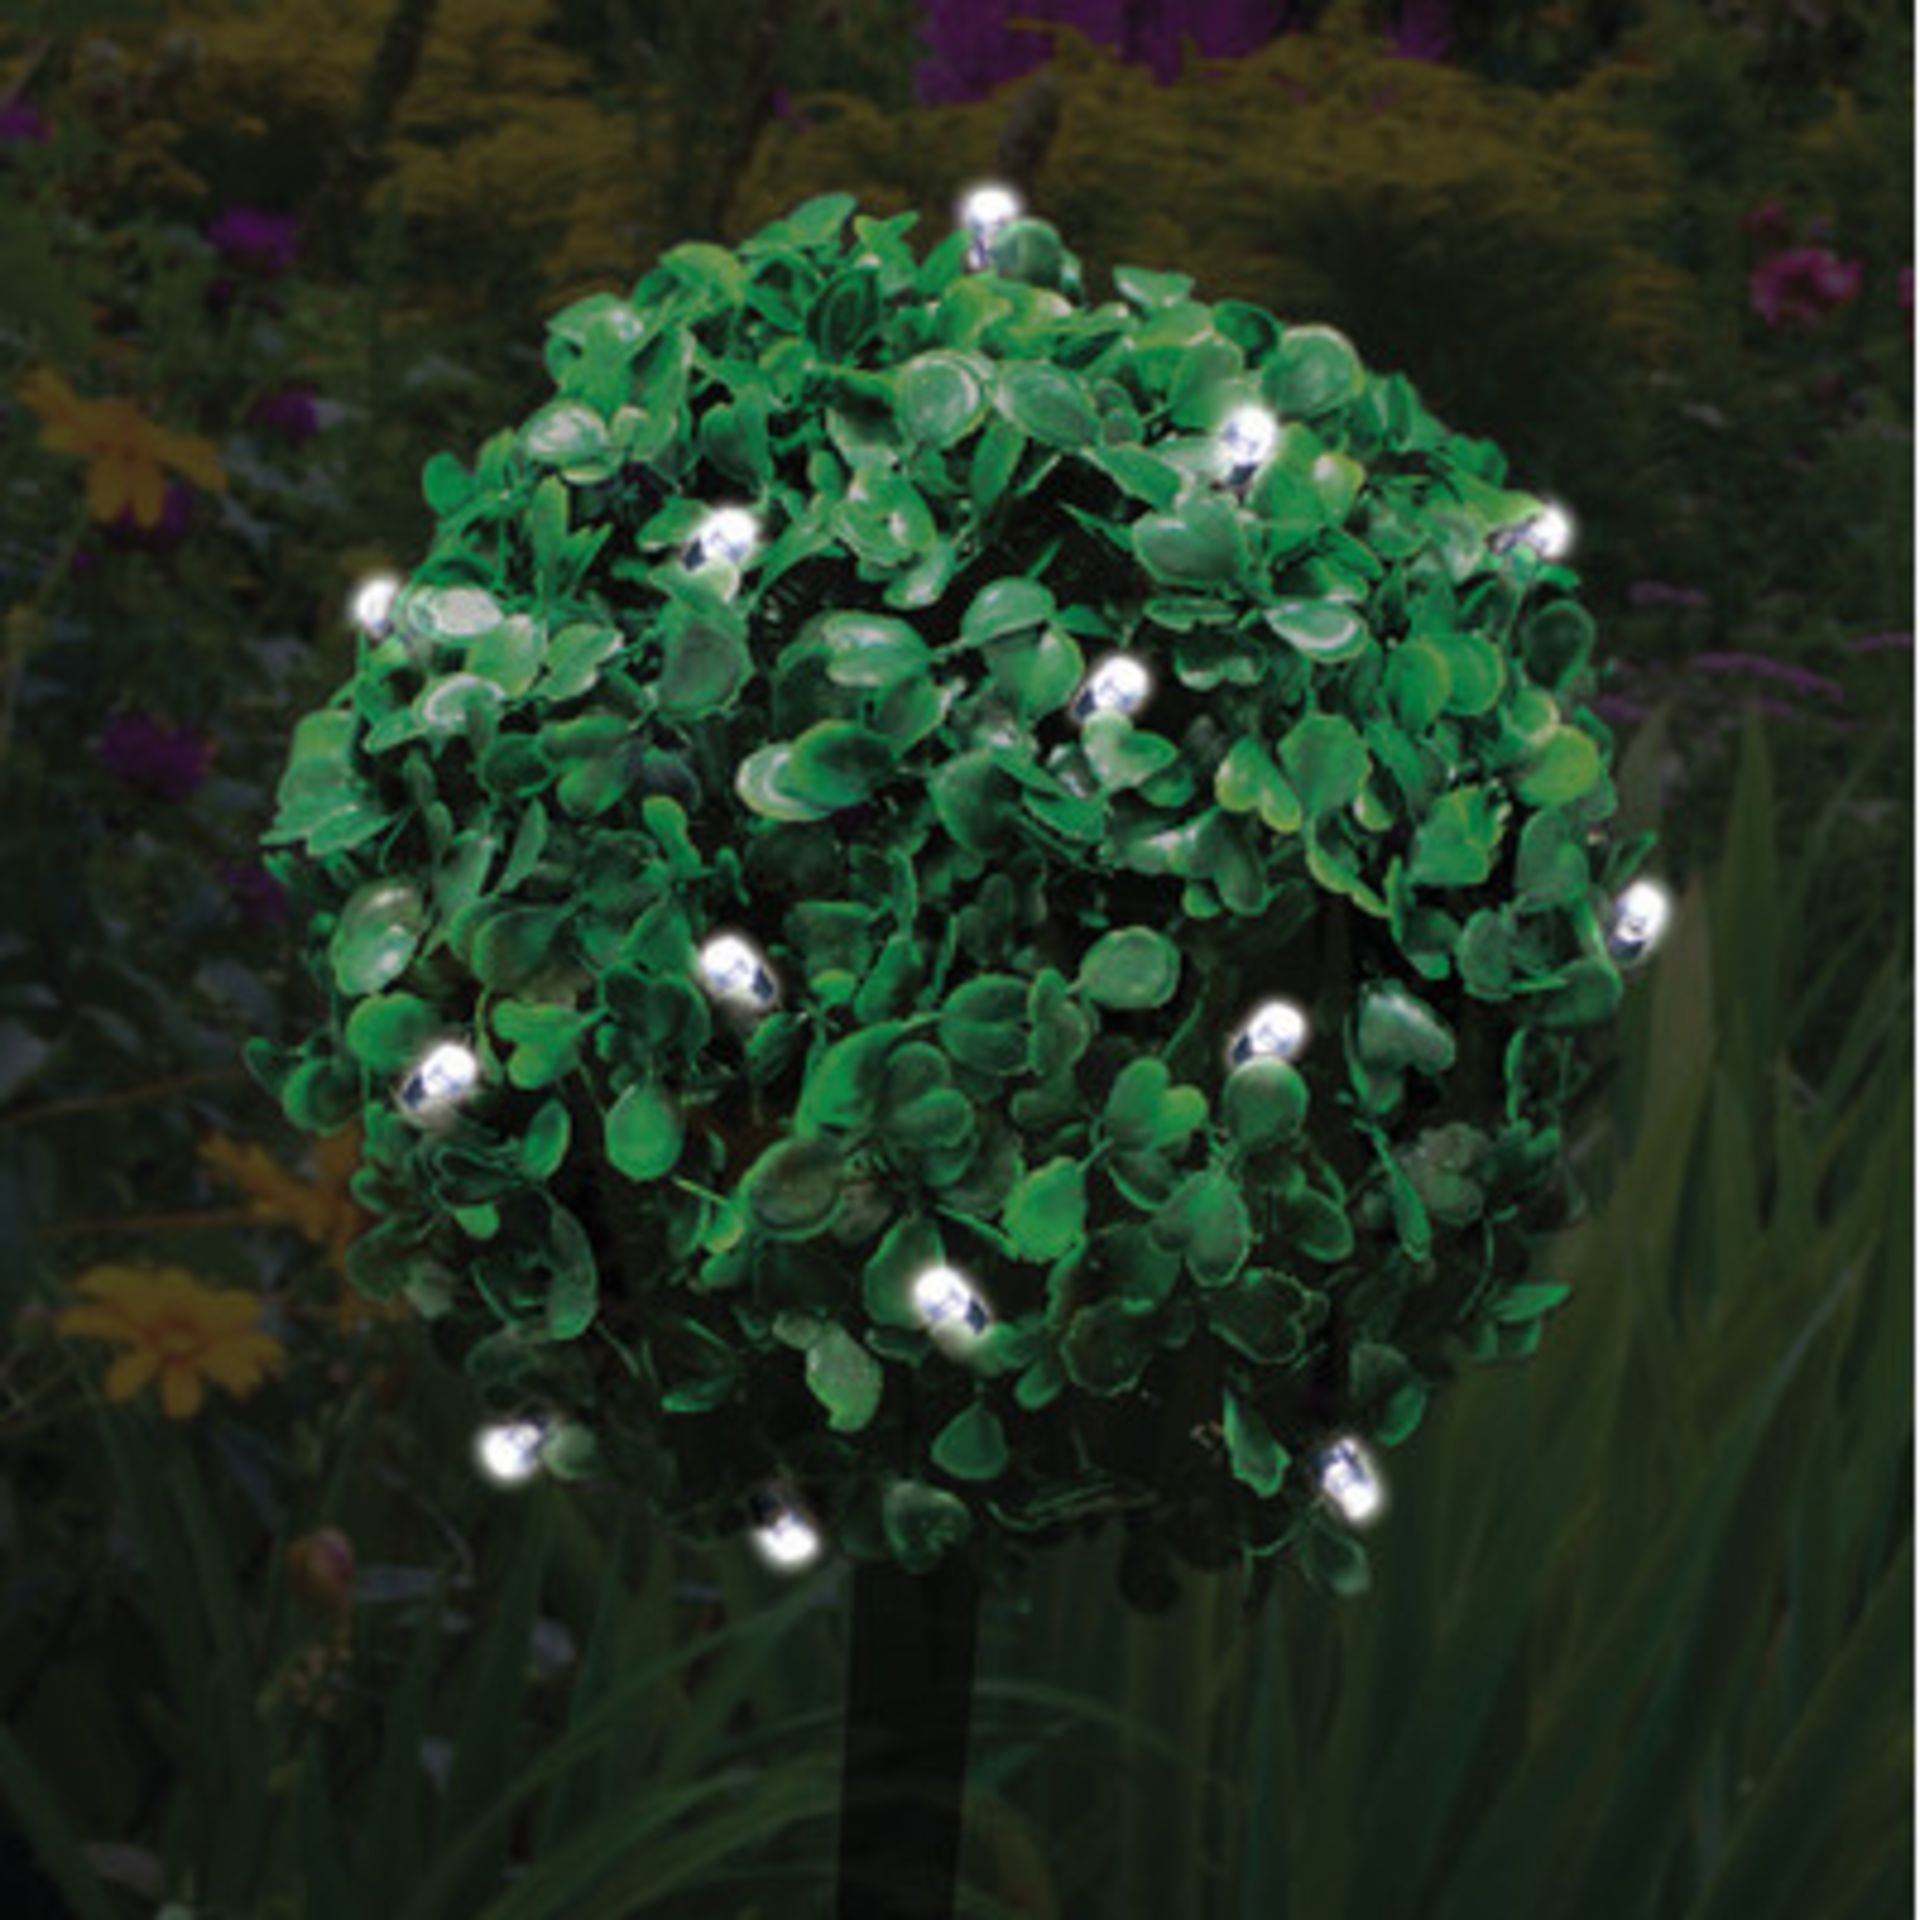 V Grade B Set Of Three Solar Powered Topiary Ball Lights X 2 YOUR BID PRICE TO BE MULTIPLIED BY TWO